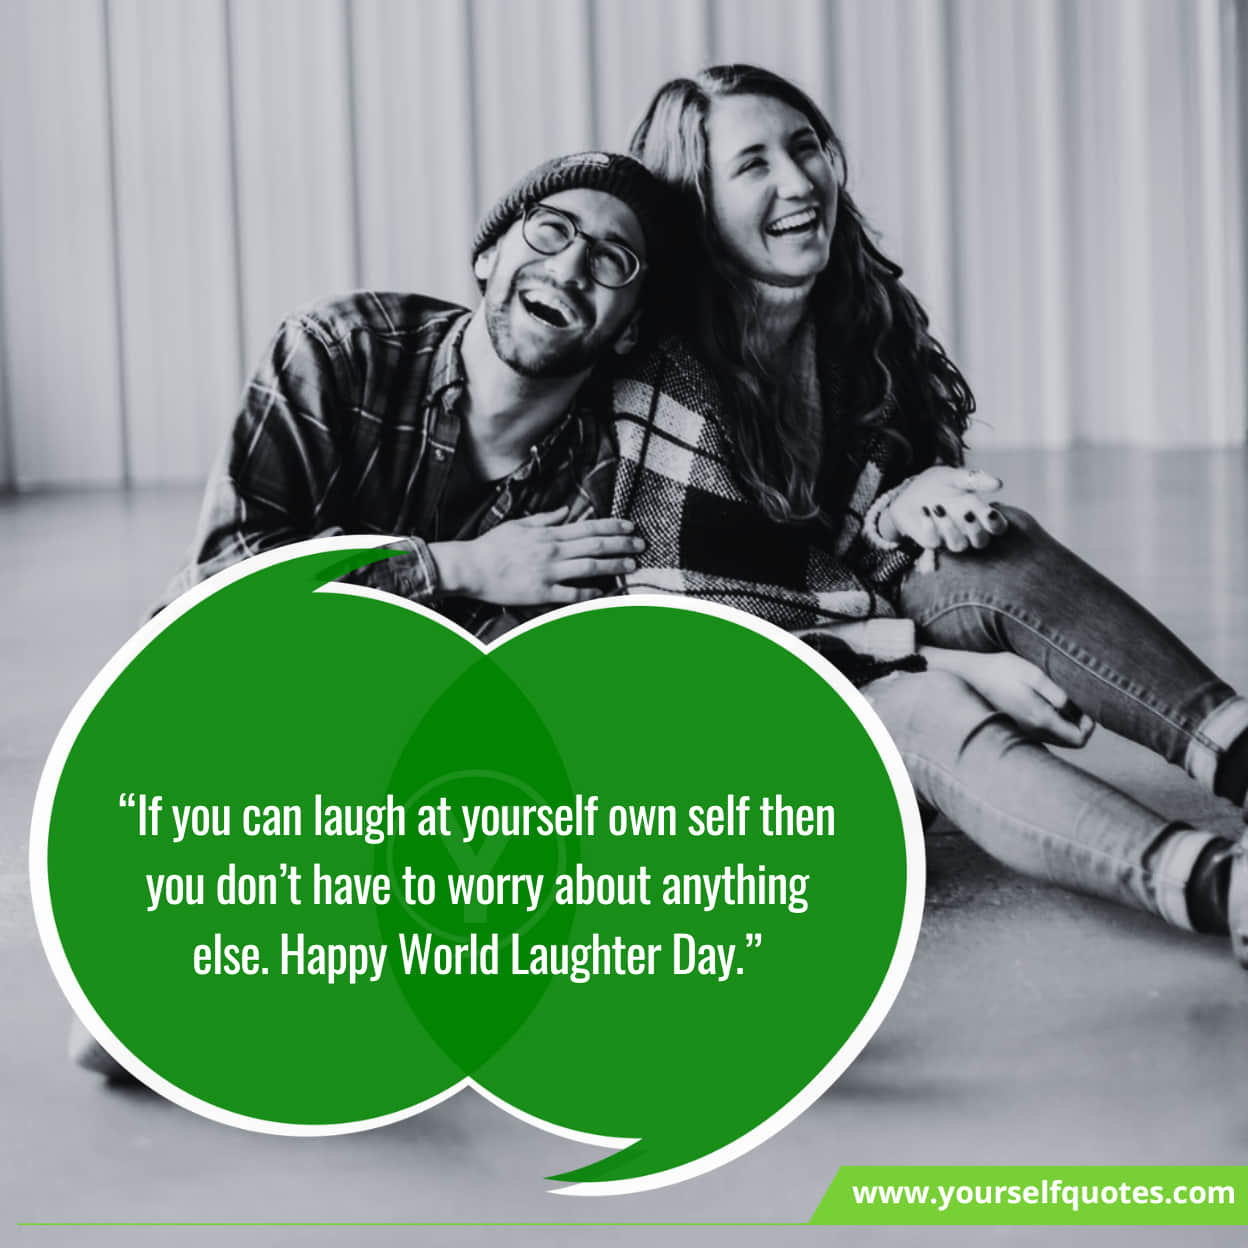 World Laughter Day Messages & Slogans